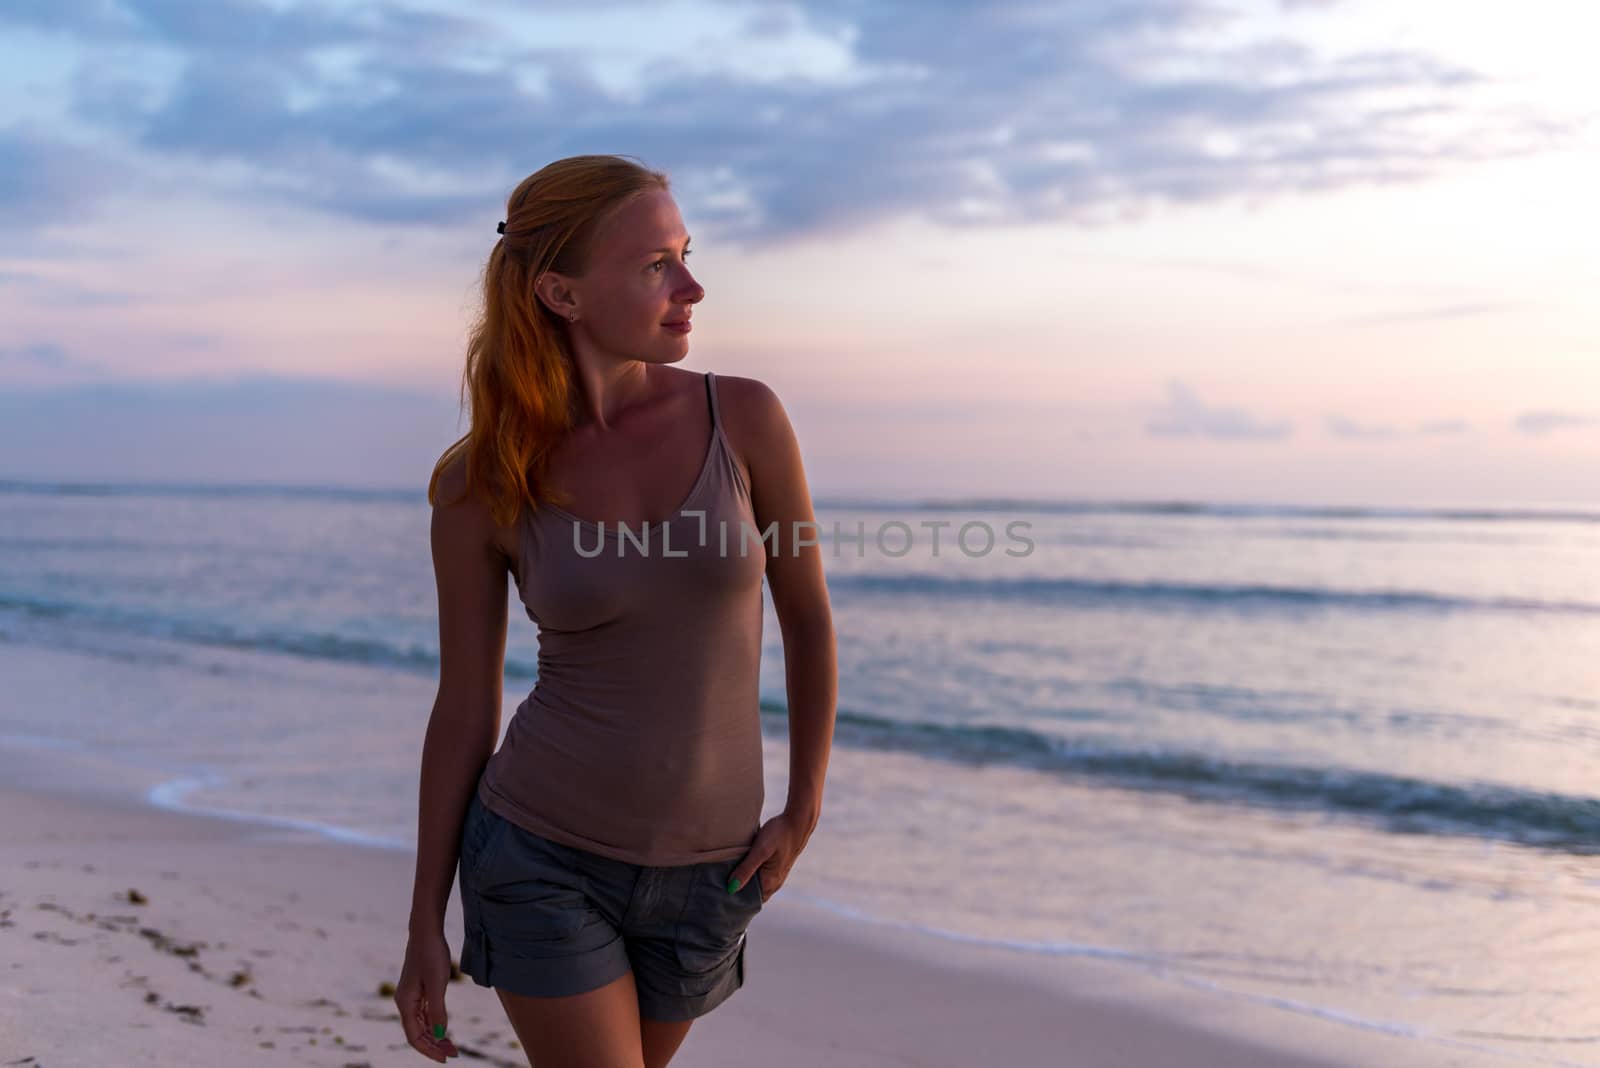 Young woman enjoying sunset view at tropical island beach